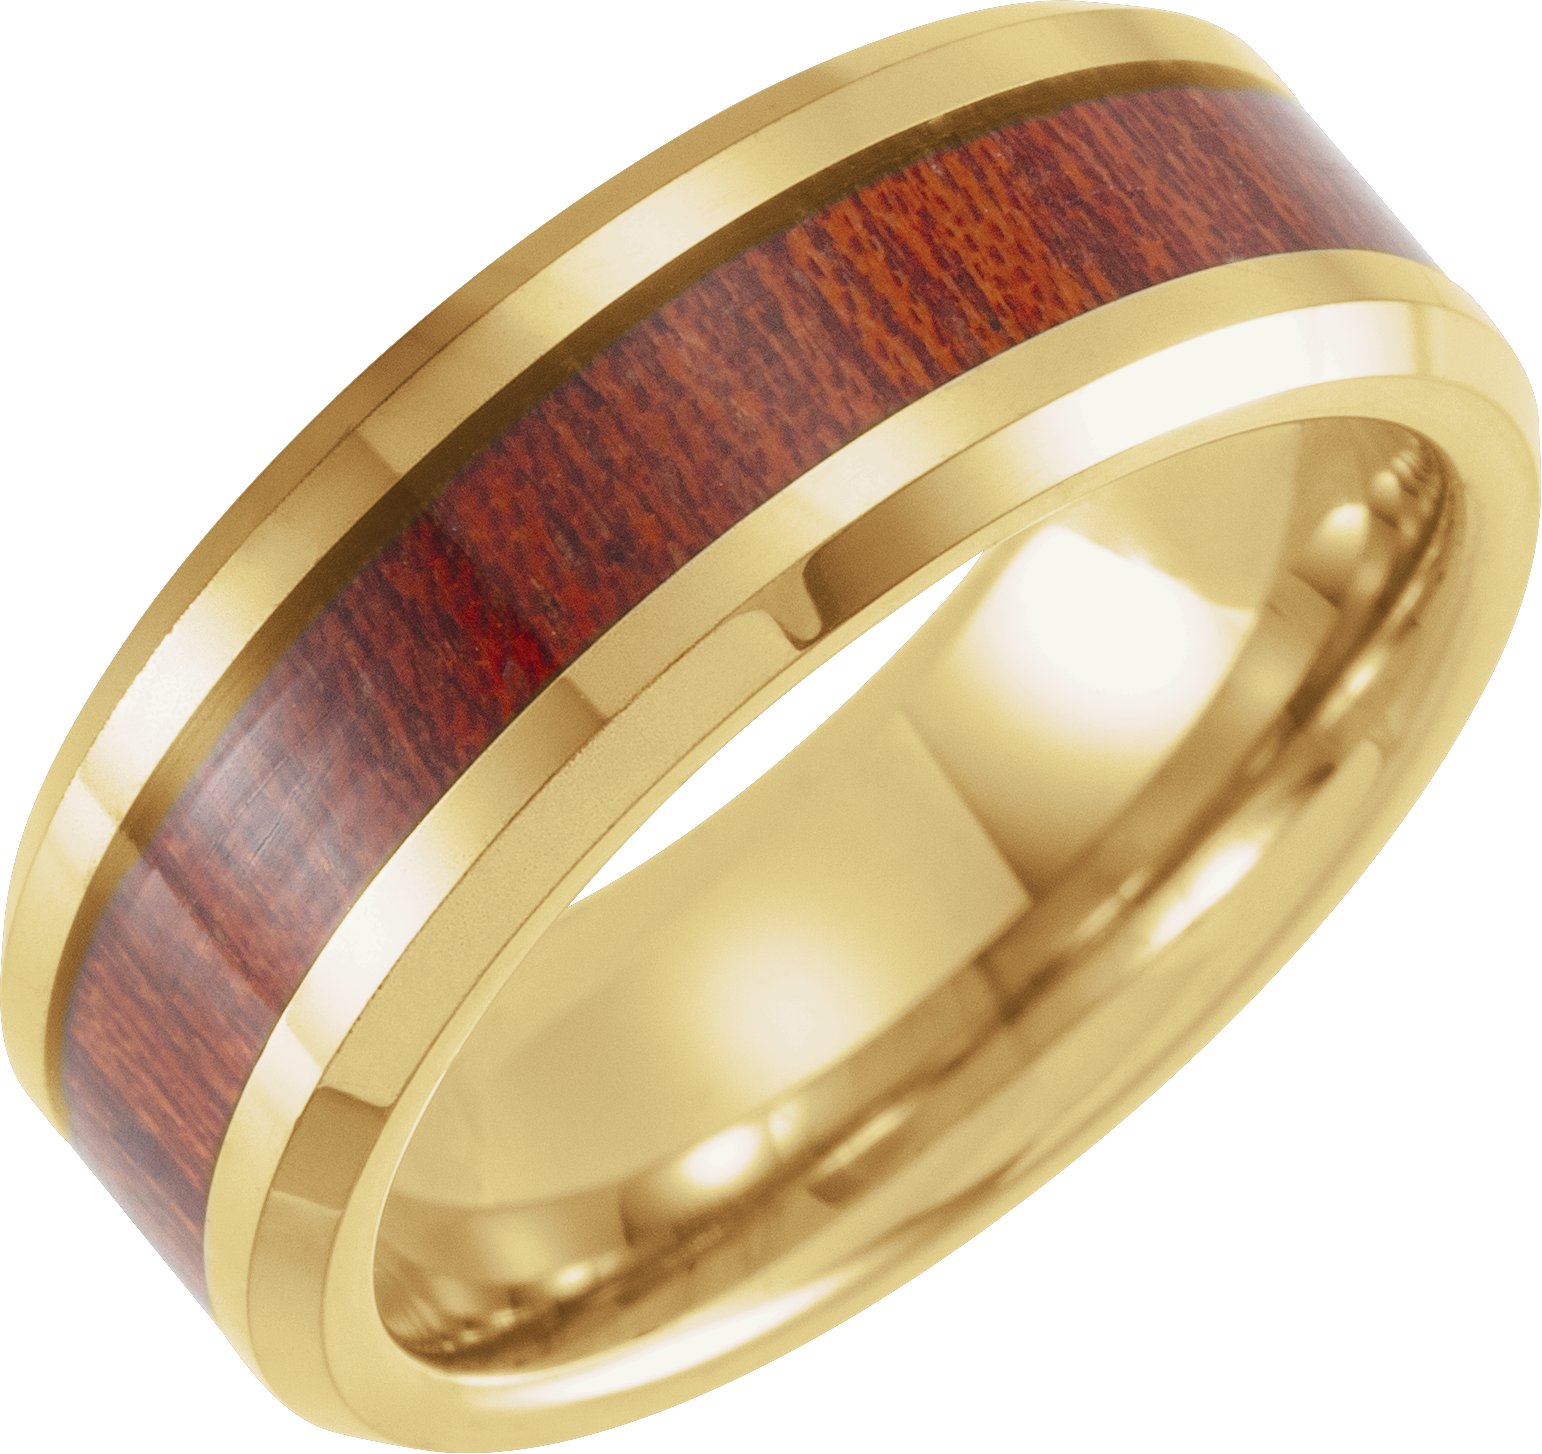 18K Yellow Gold PVD Tungsten 8 mm Beveled Band with Walnut Wood Inlay Size 11.5